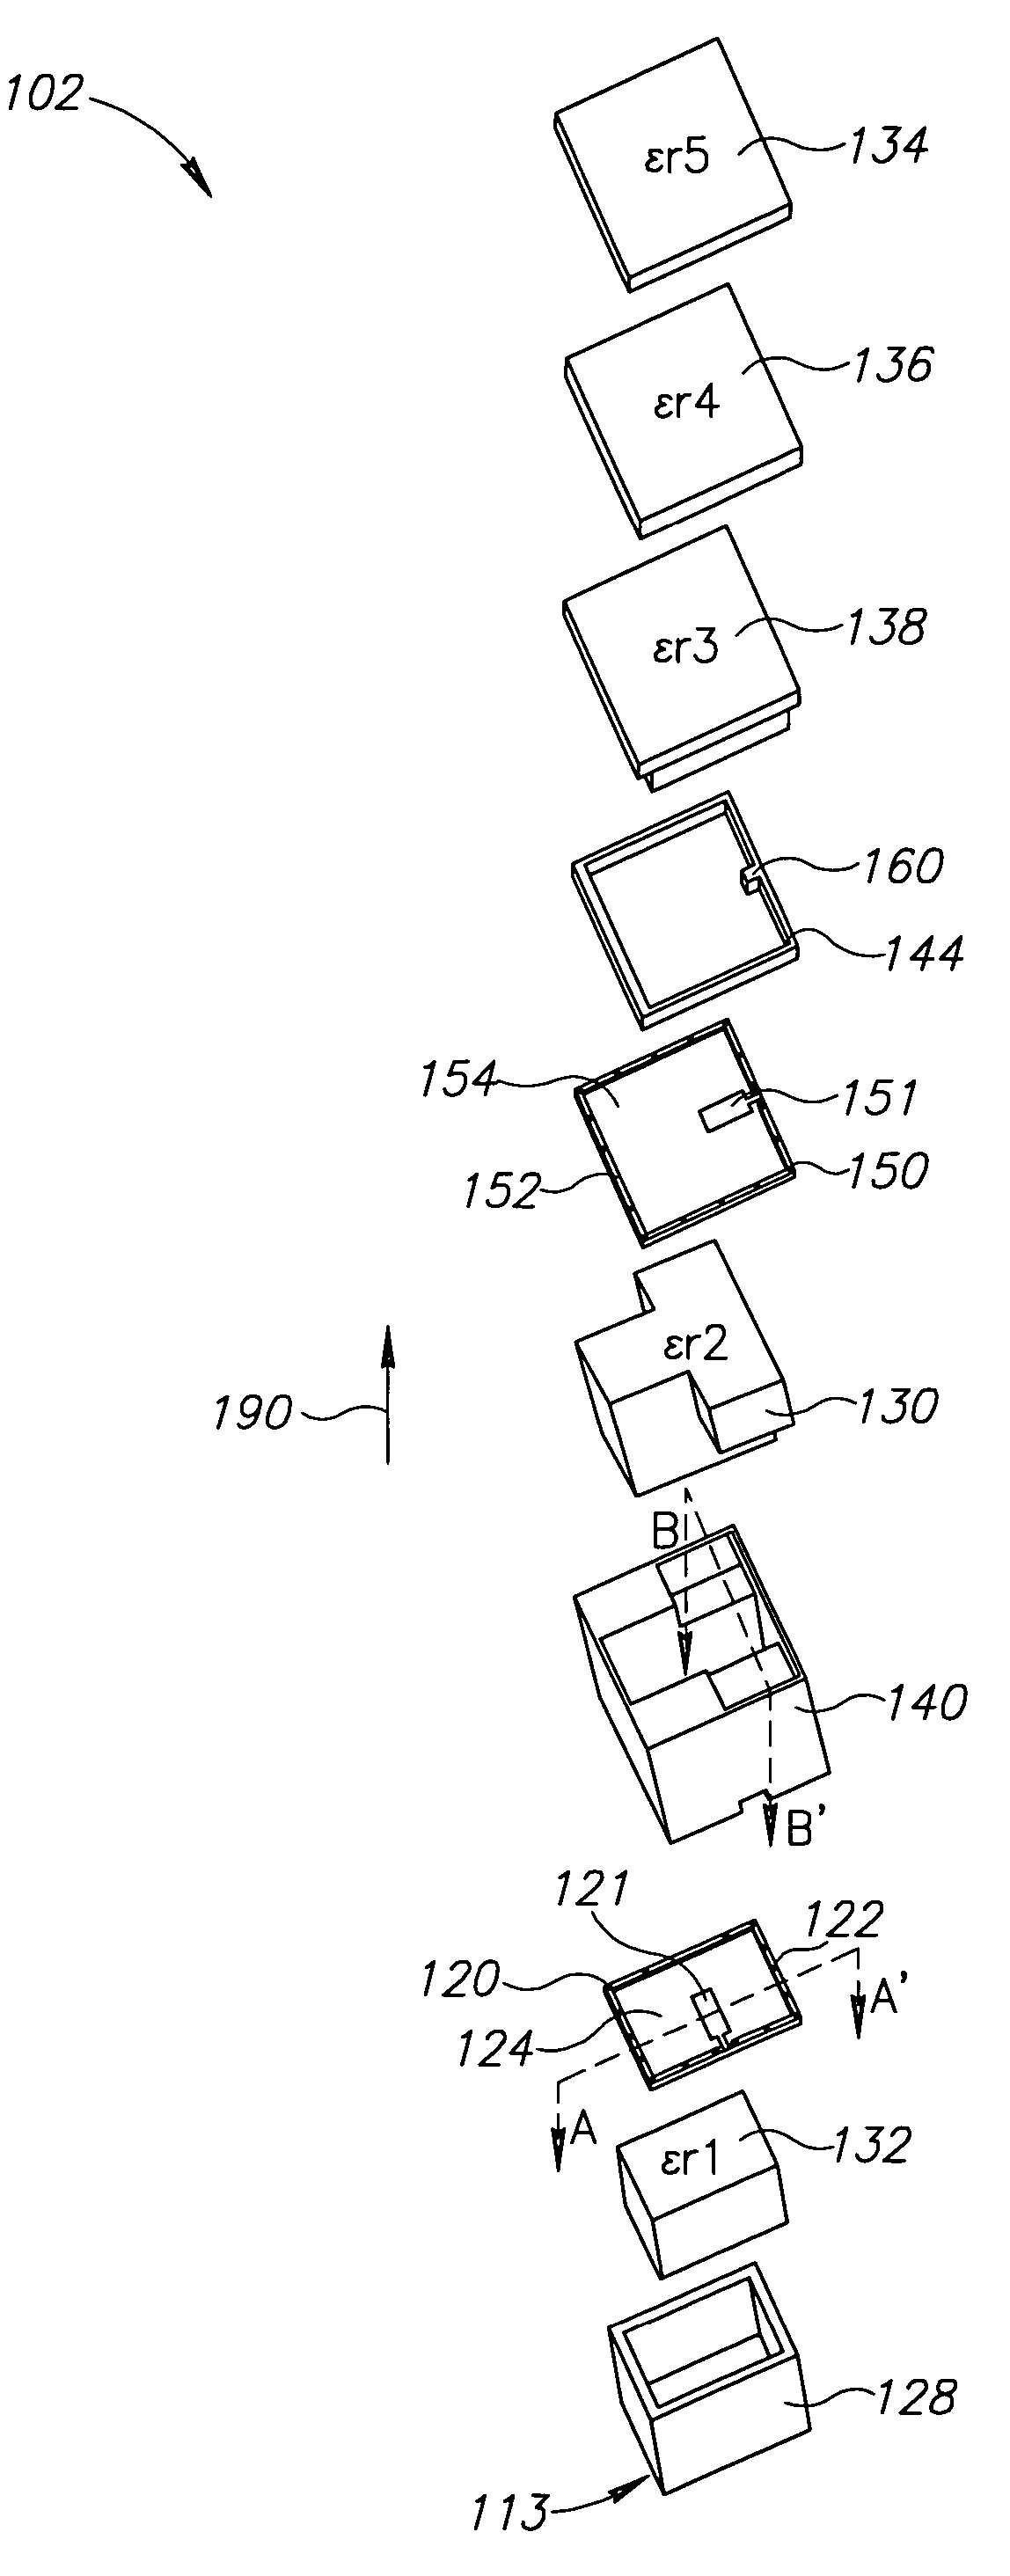 Dual polarization planar array antenna and cell elements therefor